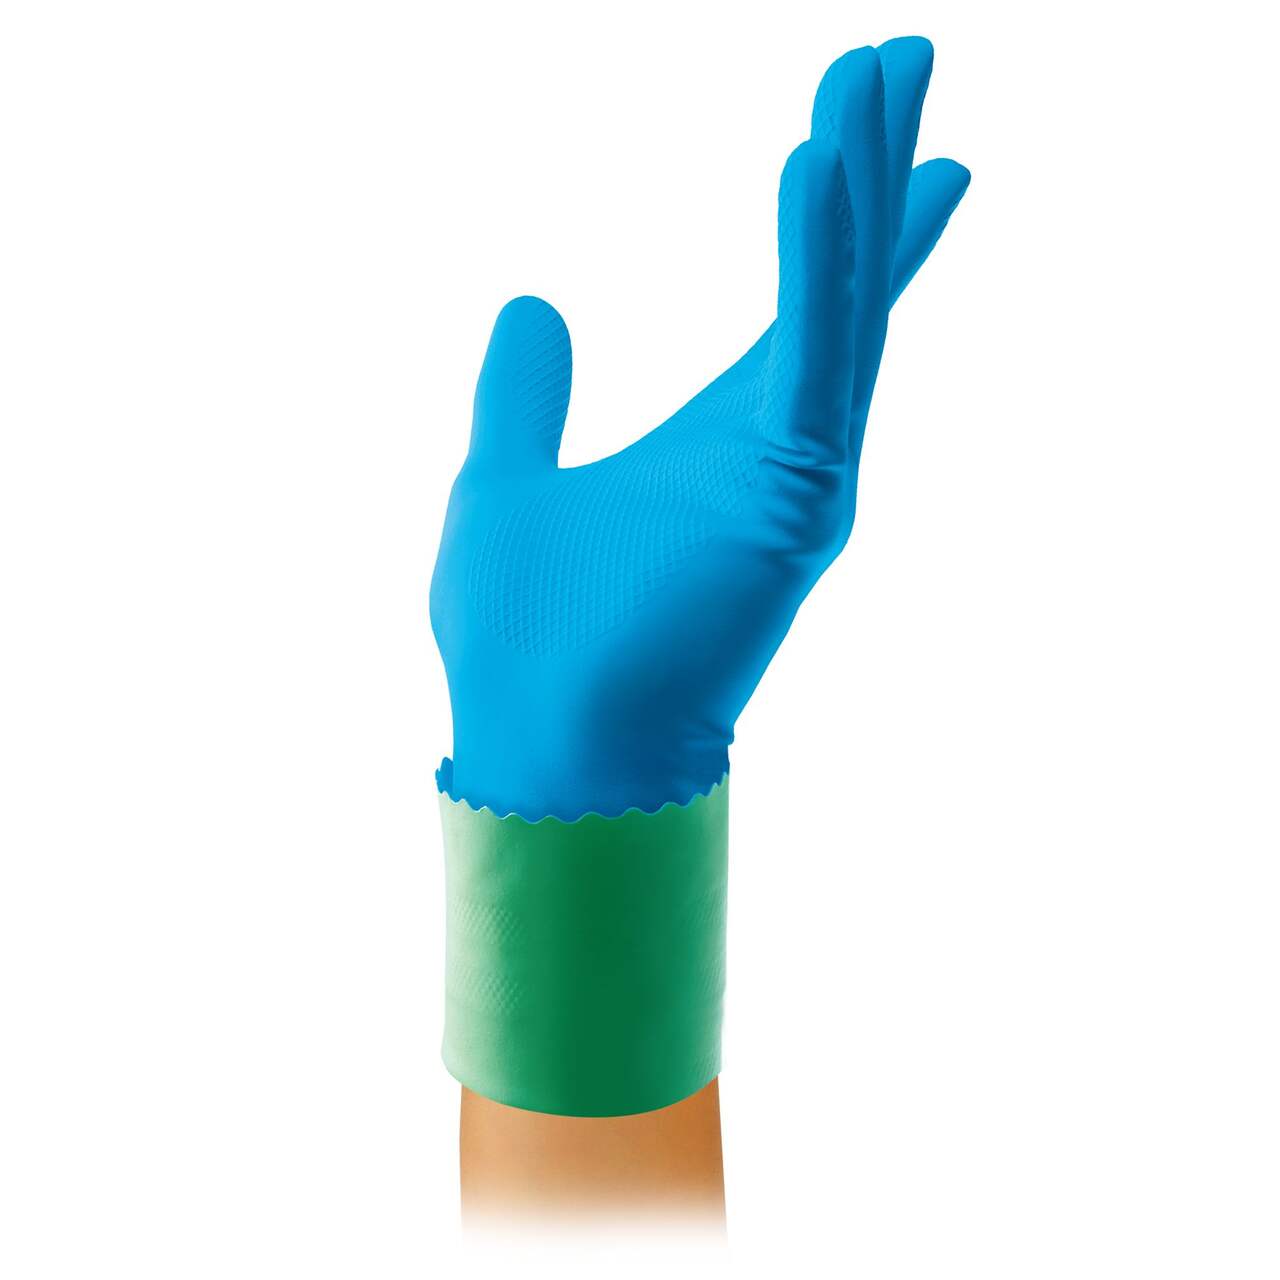 https://media-www.canadiantire.ca/product/living/cleaning/household-cleaning-tools/1420422/vileda-comfort-gloves-s-m-e3ba3e19-54c6-493b-a035-f1a8d3b1fb86-jpgrendition.jpg?imdensity=1&imwidth=1244&impolicy=mZoom